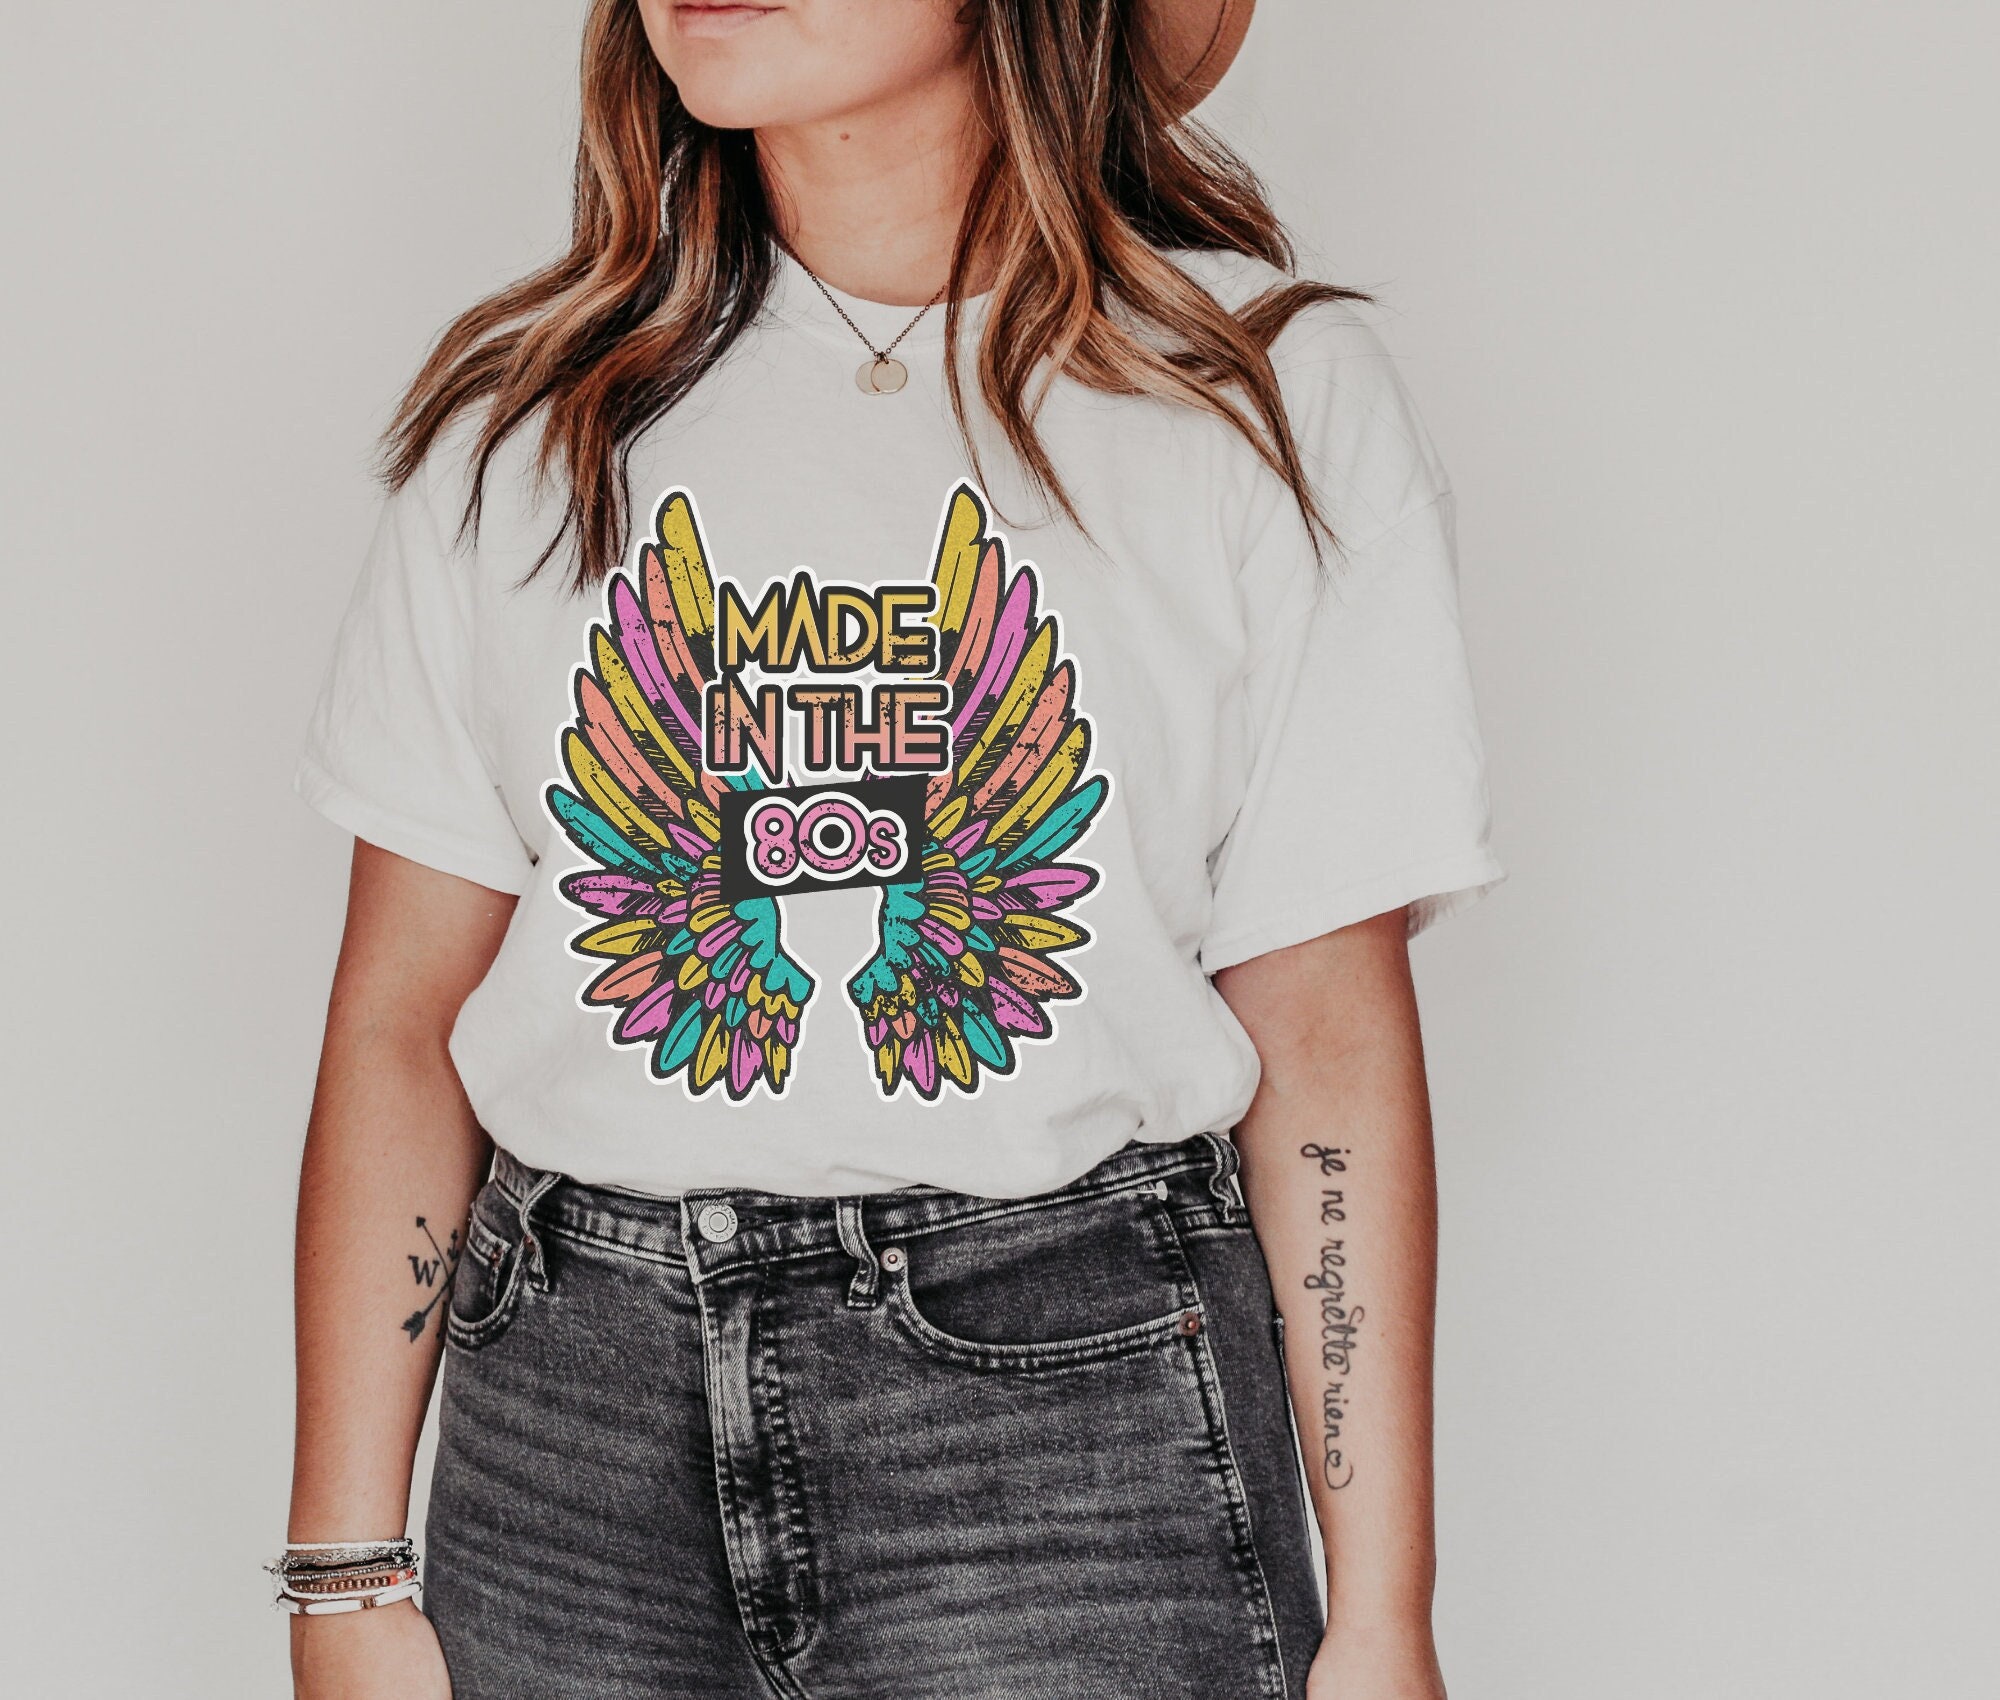 Gárgaras concepto Puñado Made in the 80s Graphic T-shirt Wing Shirt 80s Kids Tee 80s - Etsy